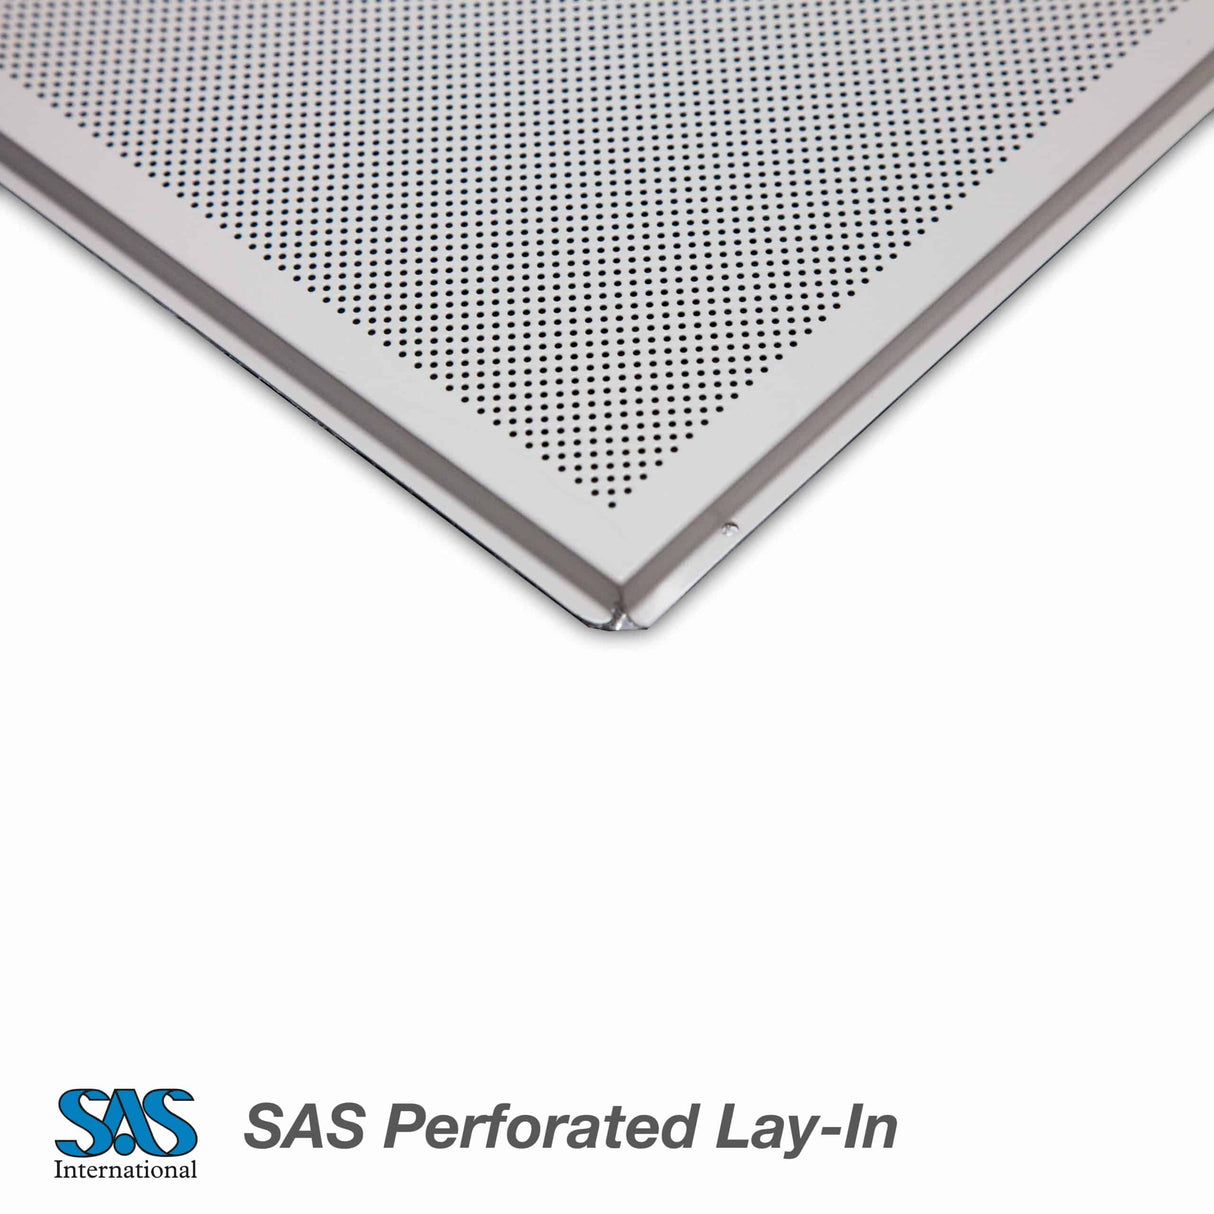 SAS System 130 Tegular Lay-In Metal Ceiling Tiles – 600x600mm – Perf 1522 (15mm grid) (16)